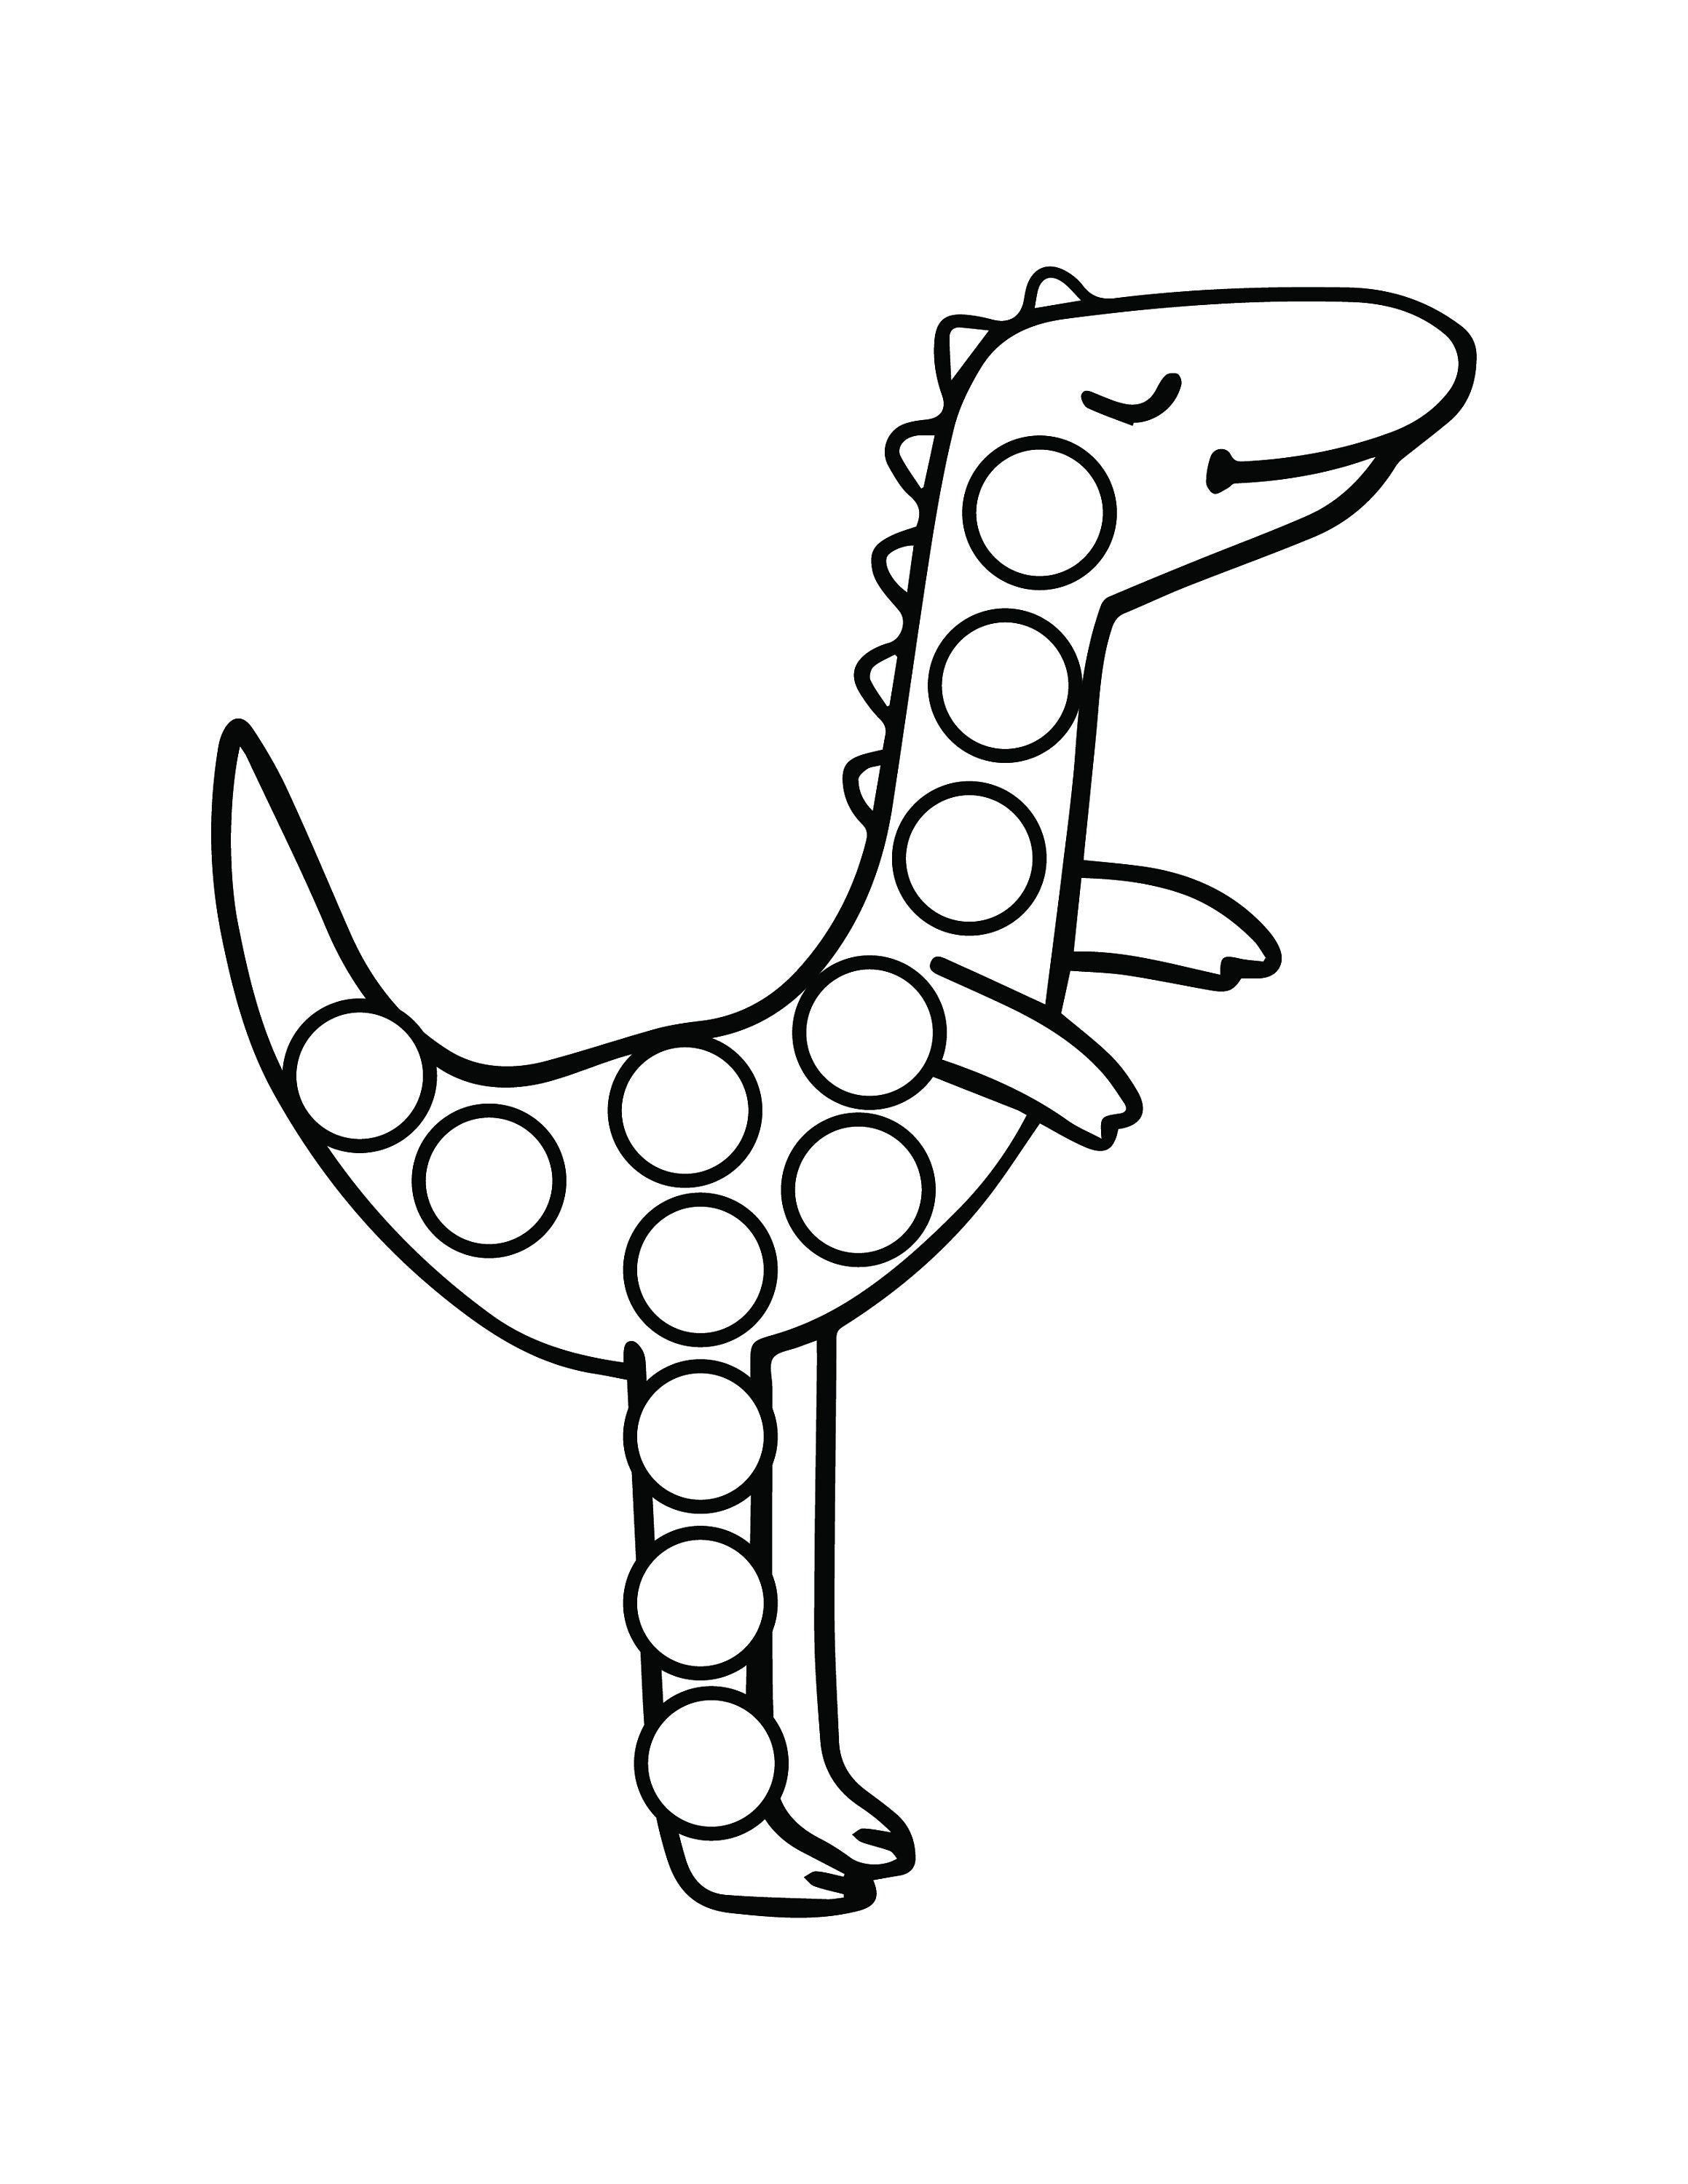 Dot Markers Activity Book ABC Dinosaurs: Dot Marker Coloring Worksheets  With Alphabet Letters And Dinosaurs For Kids Ages 4-8 - Dinosaur Coloring  Book (Paperback)